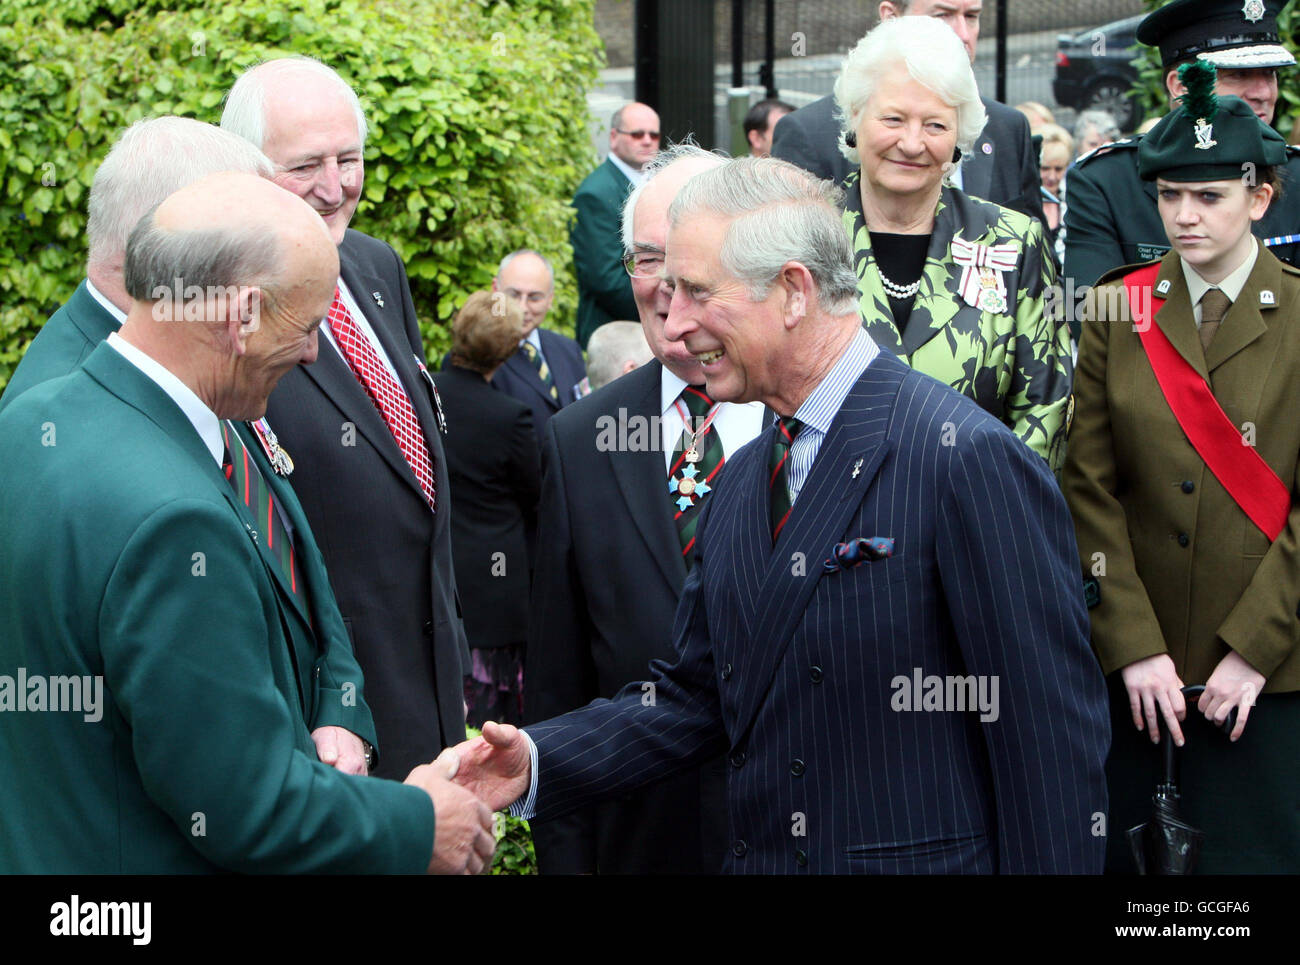 The Prince of Wales meets Ex RUC officers and their families (names not supplied), in the Royal Ulster Constubulary,George Cross Foundation memorial gardens at Police Headquarters in Belfast, Northern Ireland. Stock Photo